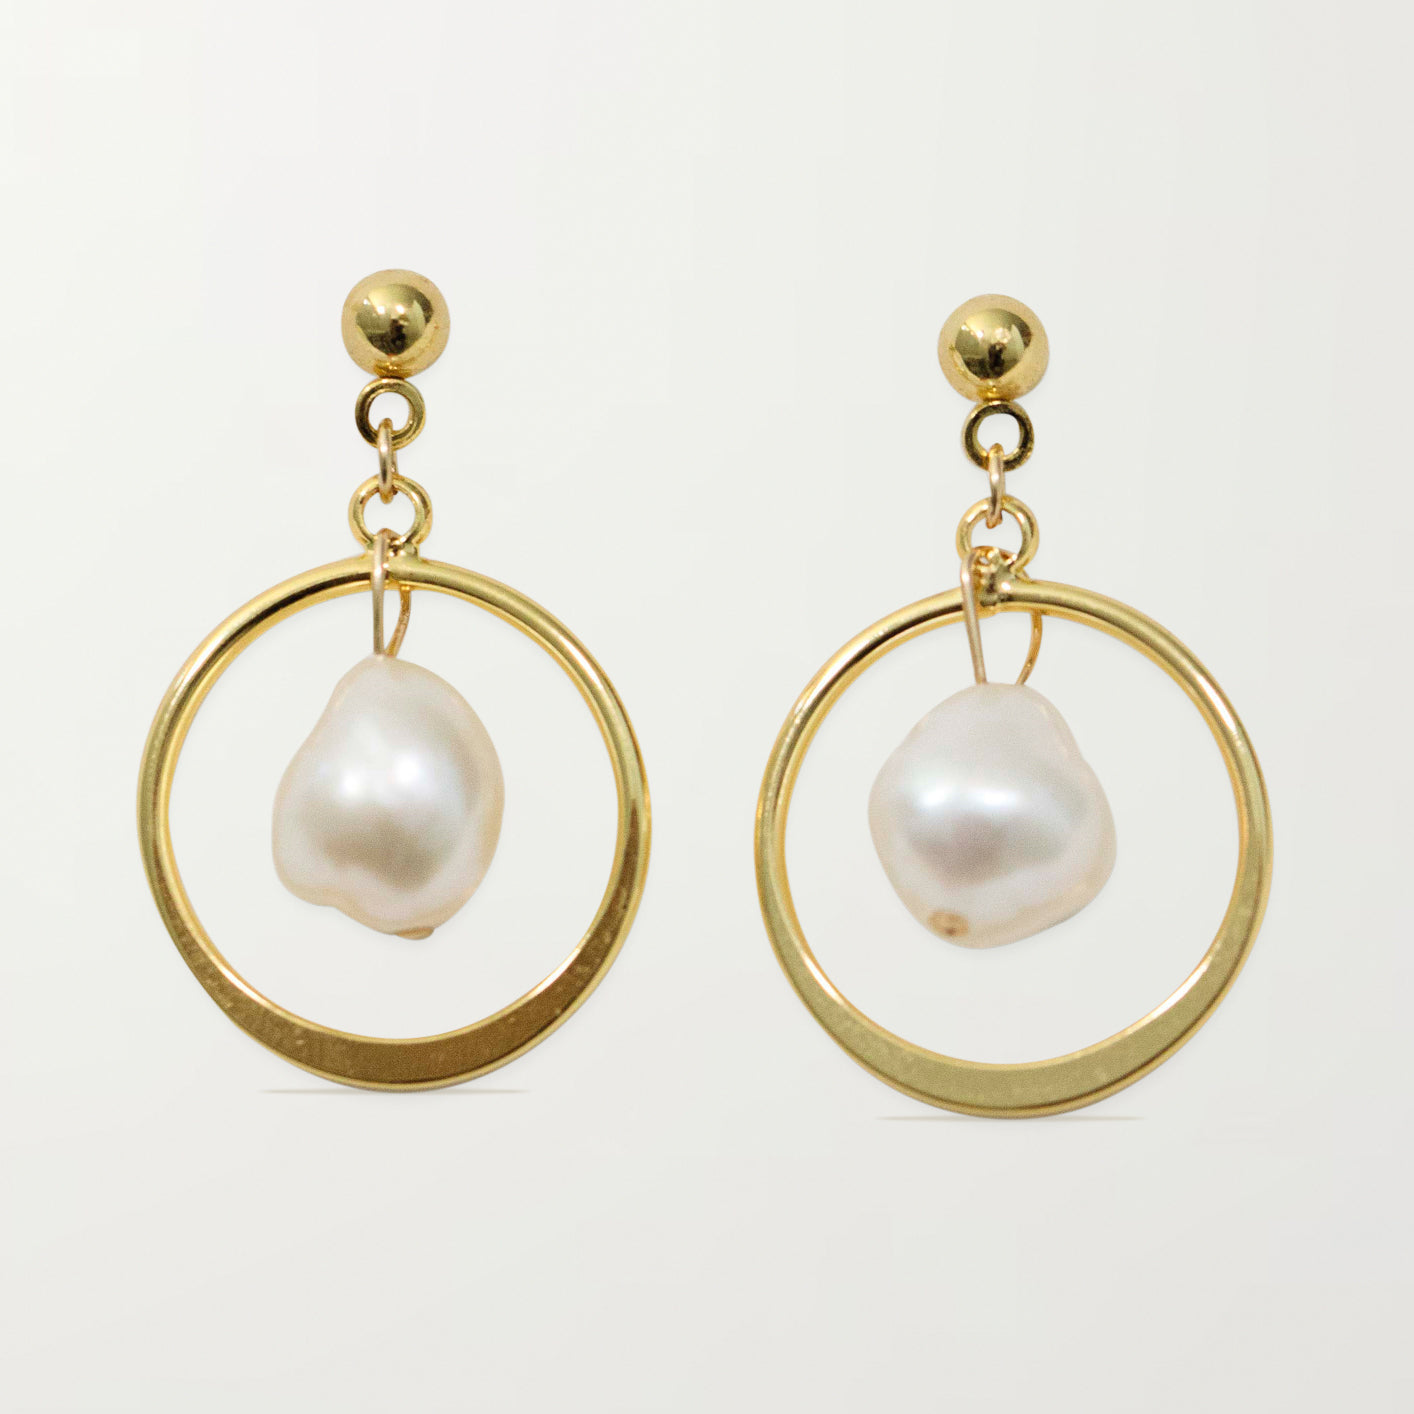 Picture of The Girona Earrings